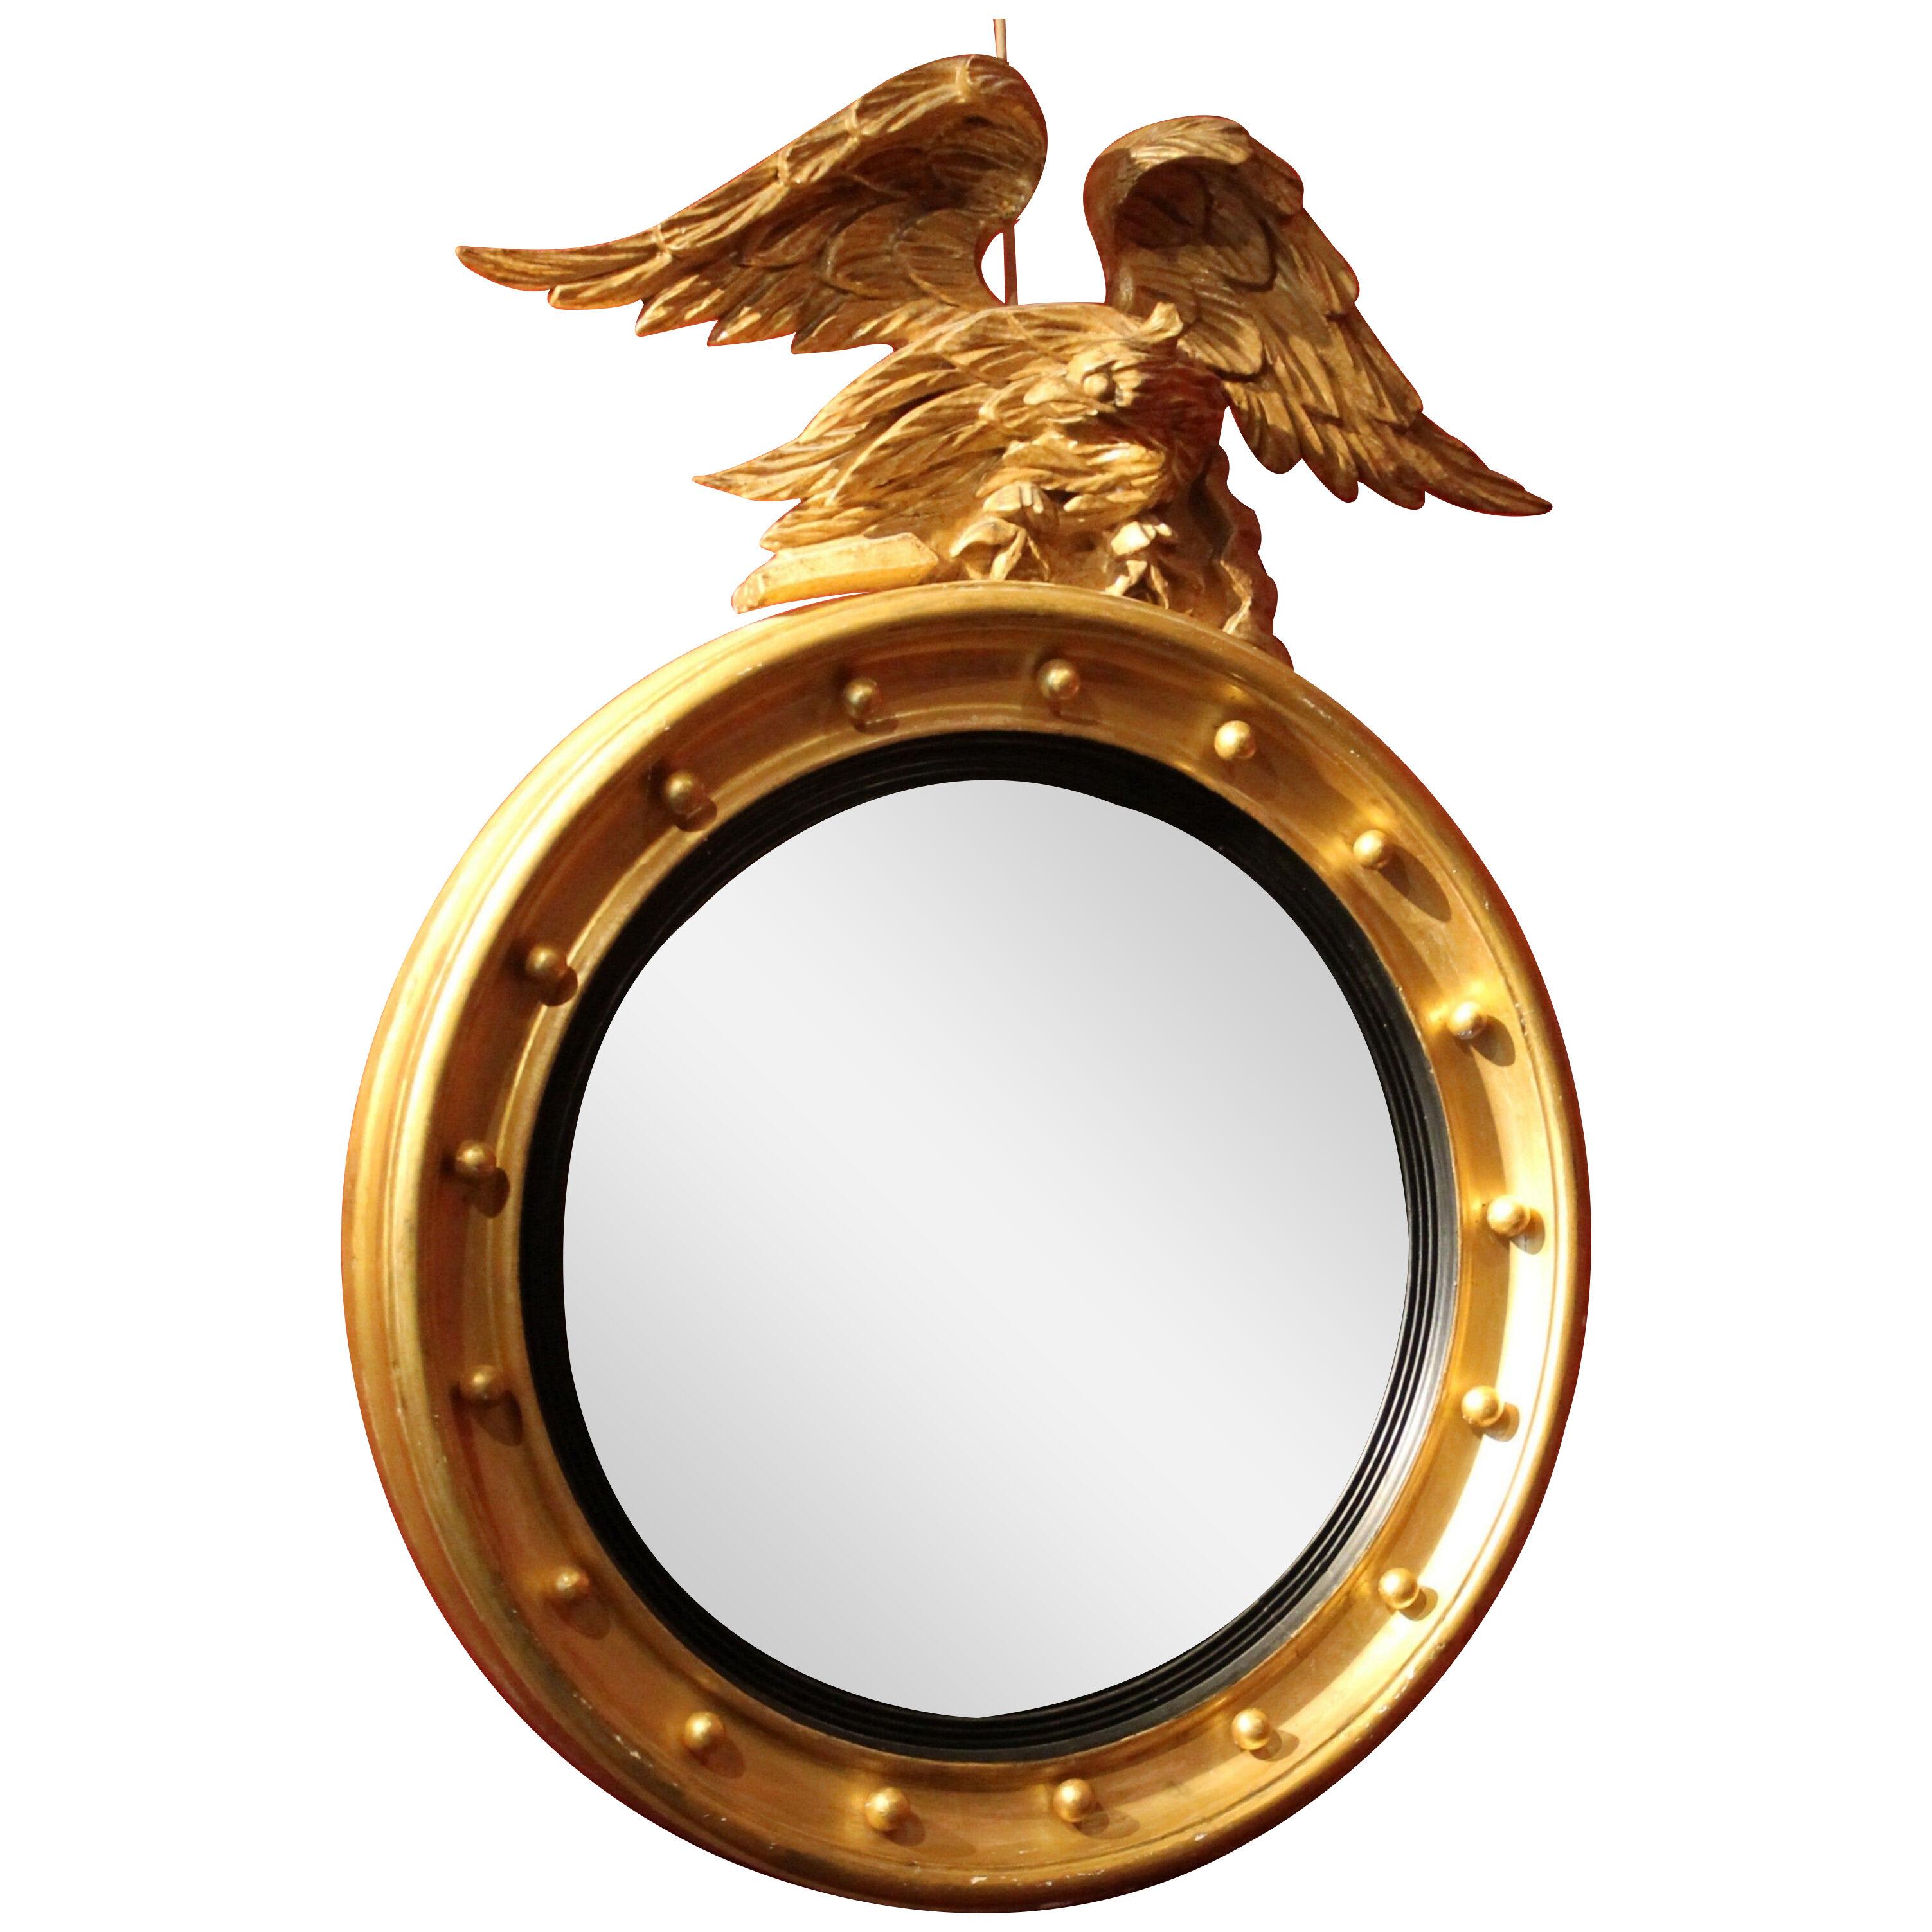 Italian Regency Round Giltwood and Ebonized Convex Mirror with Carved Eagle